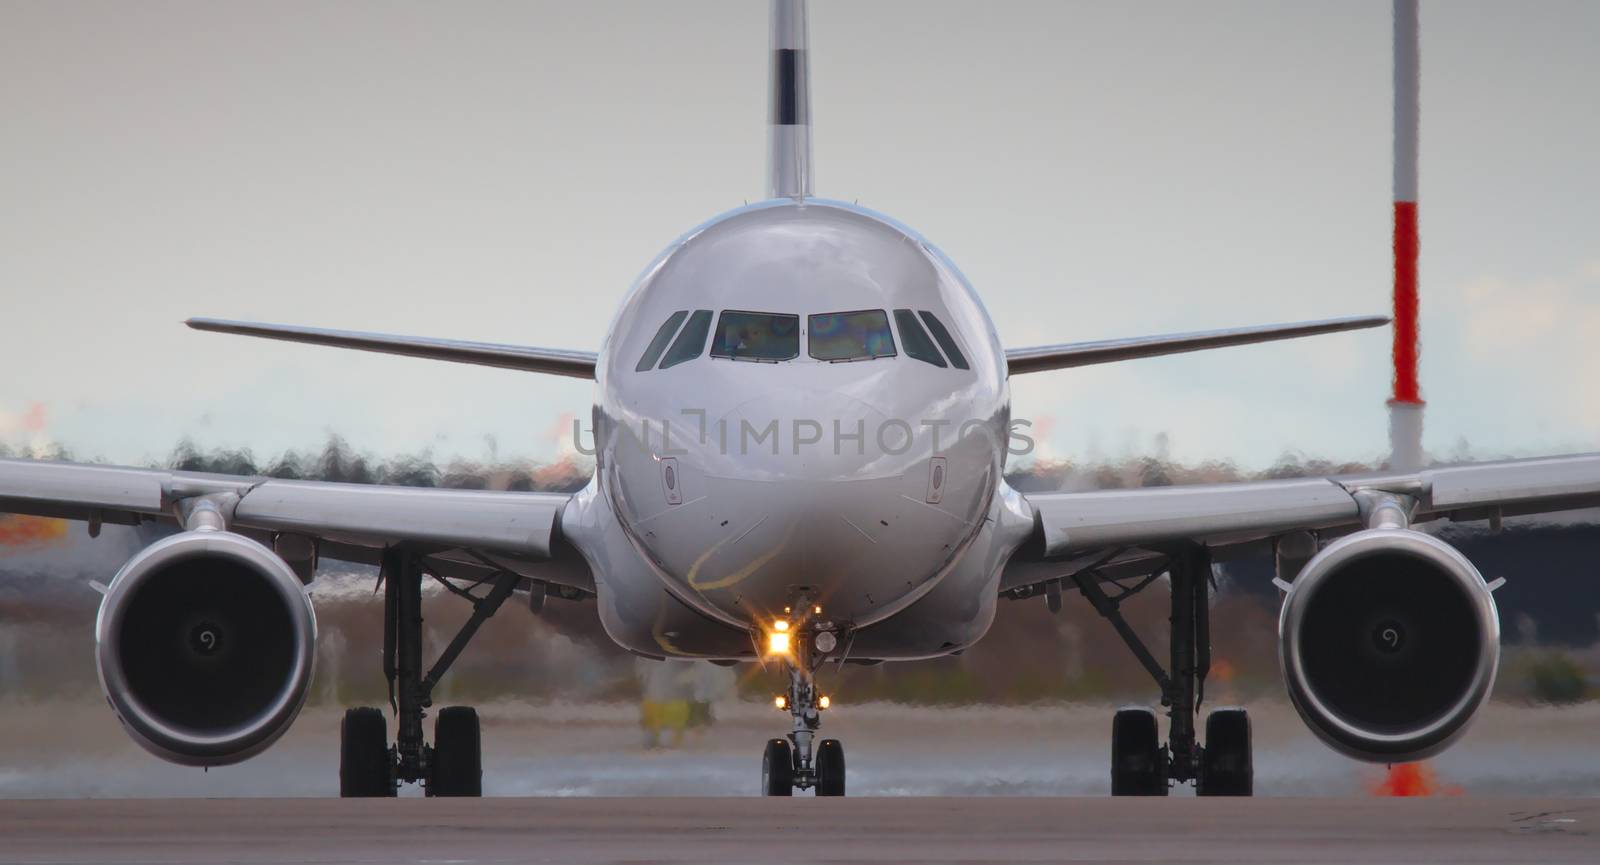 Closeup of a nose and two jet engines of a white passenger airplane standing on the runway and waiting for permission to takeoff.